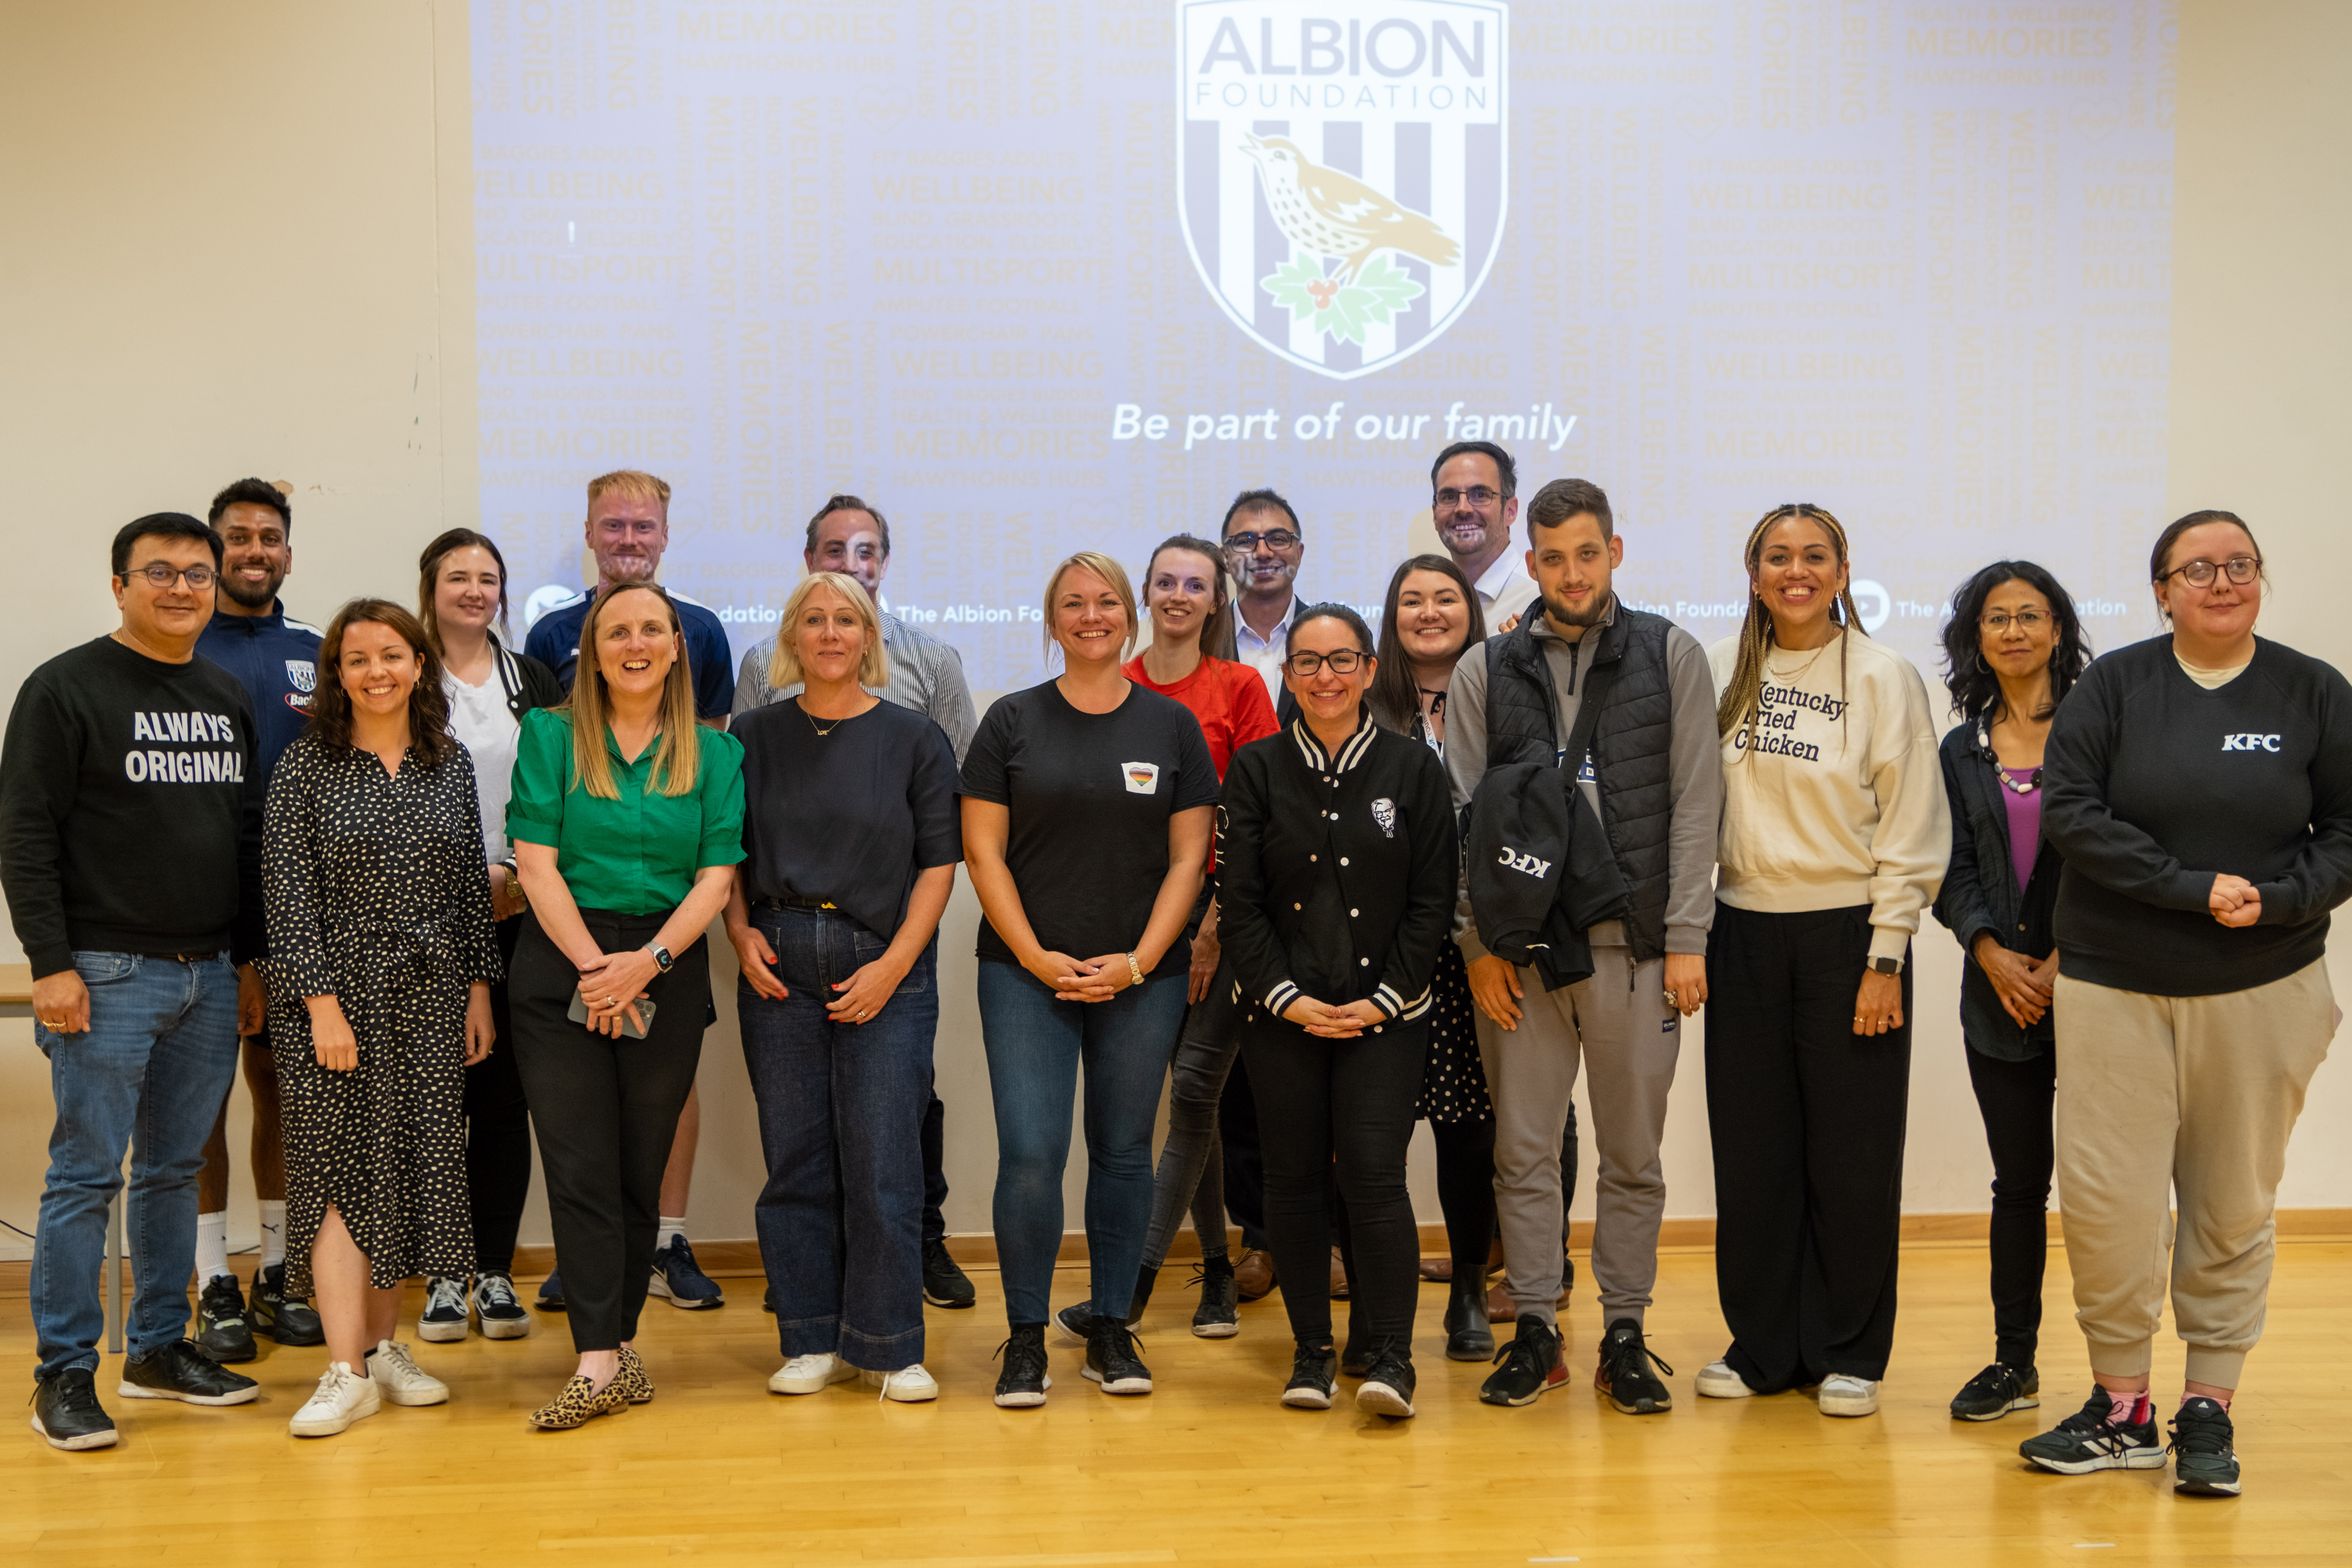 Hatch and KFC Partners visit The Albion Foundation